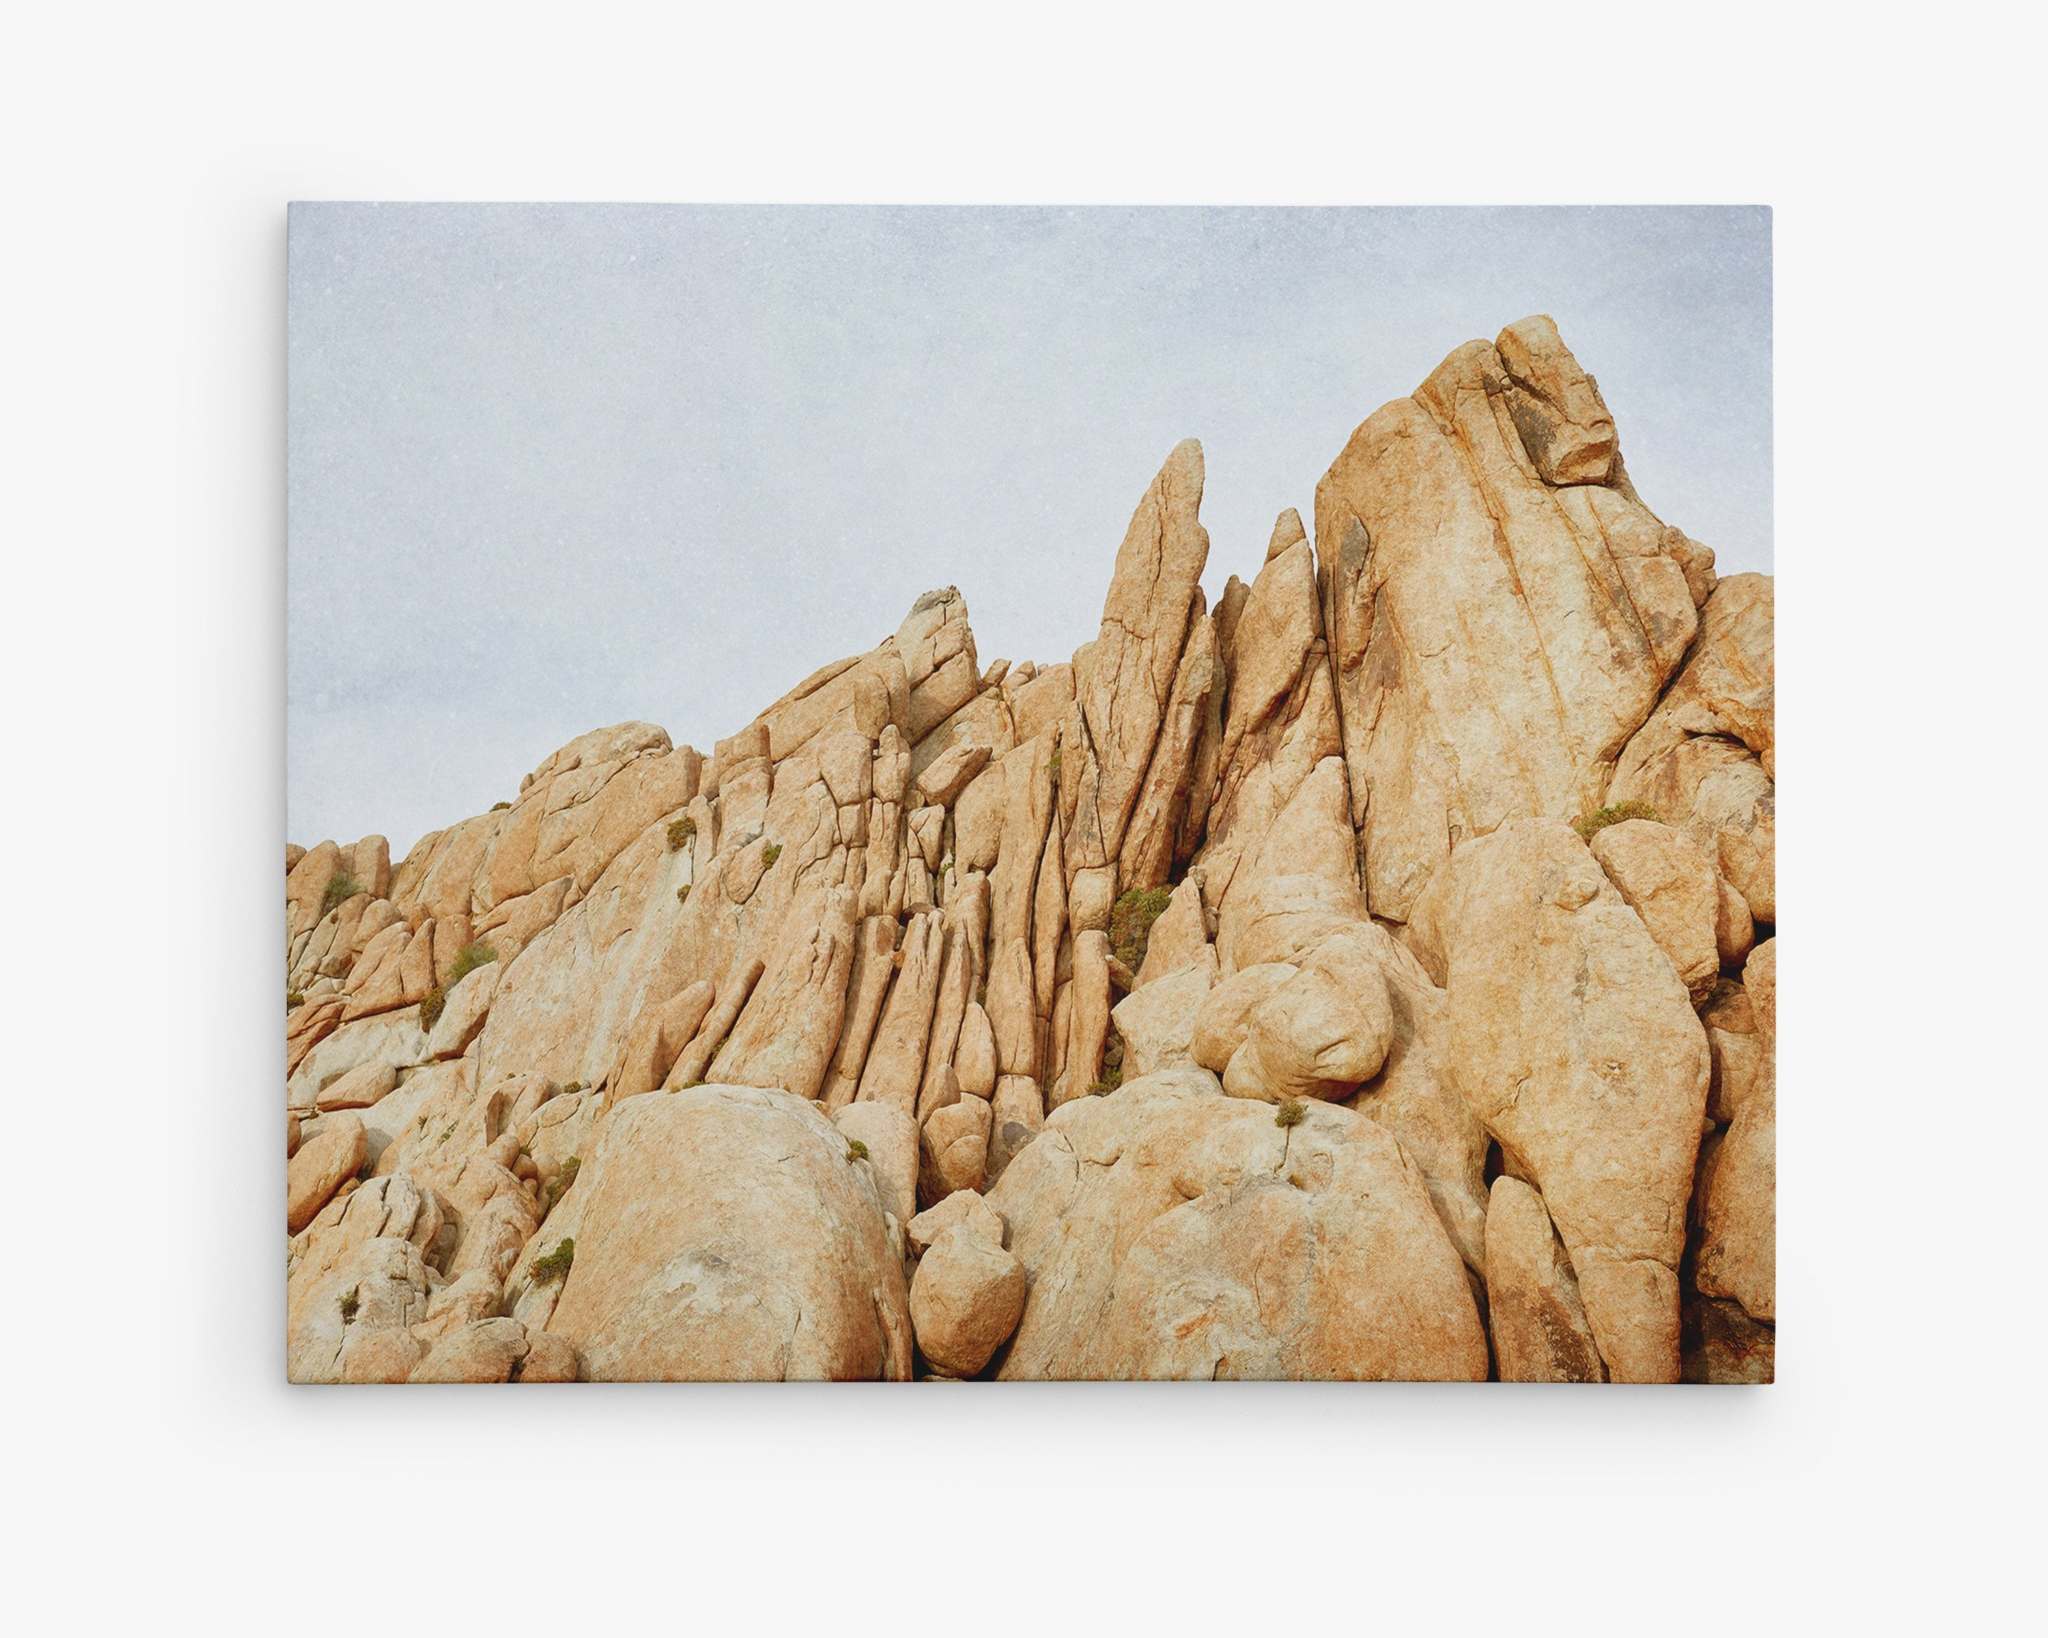 A rugged, rocky landscape featuring large, jagged sandstone formations under a pale, cloudy sky. The orange-hued rocks are stacked unevenly, resembling mid-century Palm Springs architecture, creating a striking natural scene perfect for Offley Green's Joshua Tree Canvas Wall Art titled 'Joshua Rocks'.